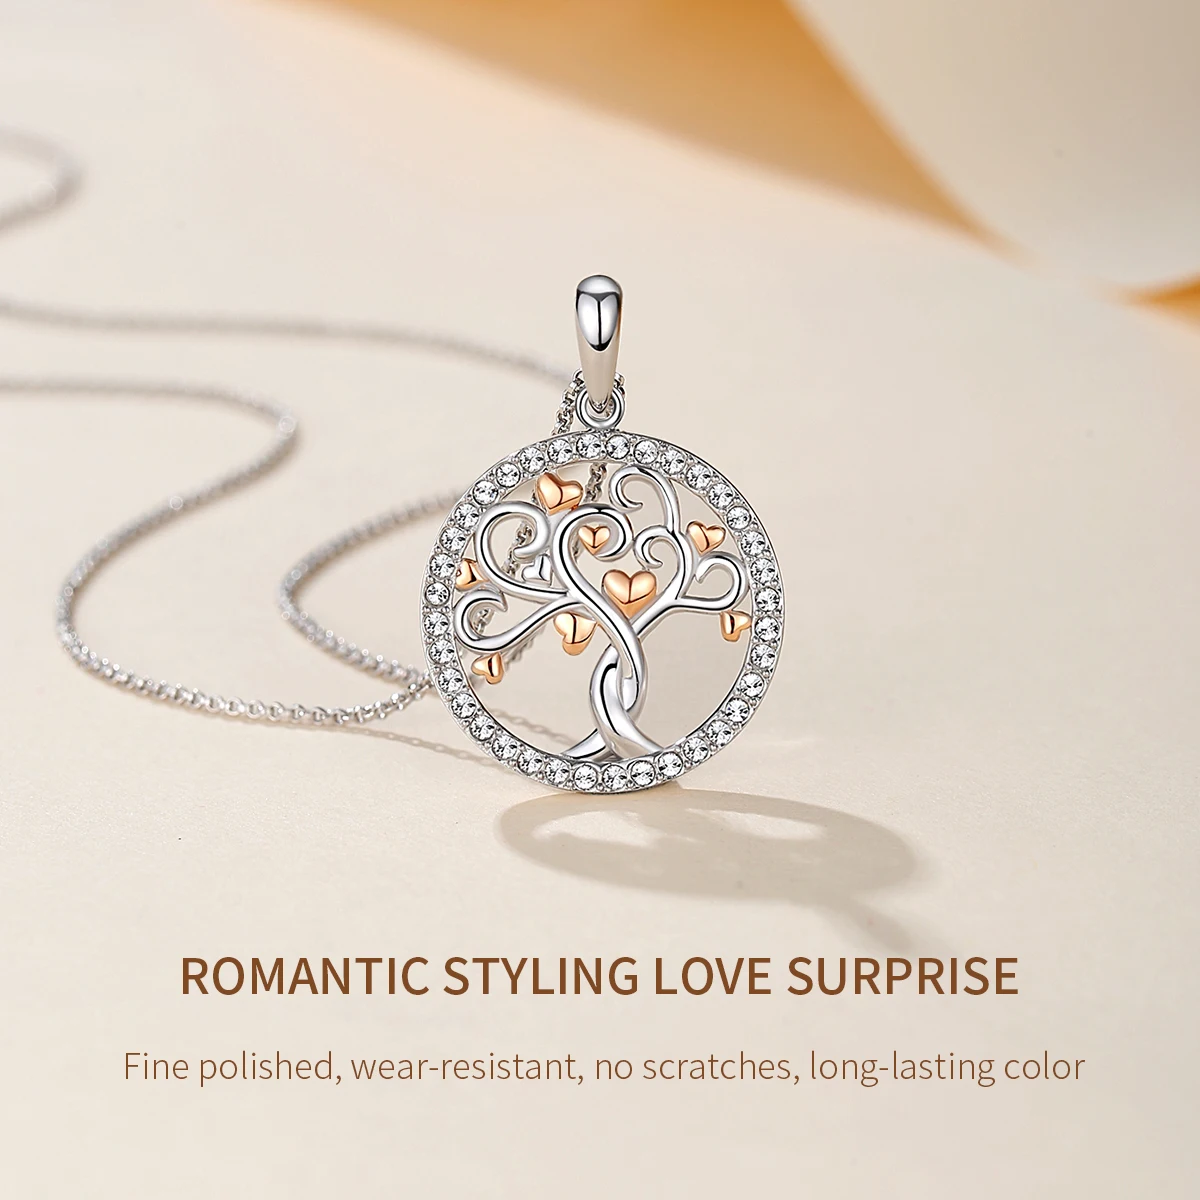 CDE YN1091 Trendy Jewelry Solid 925 Sterling Silver Charms Necklace Rhodium Plated Tree of Life Necklace For Women